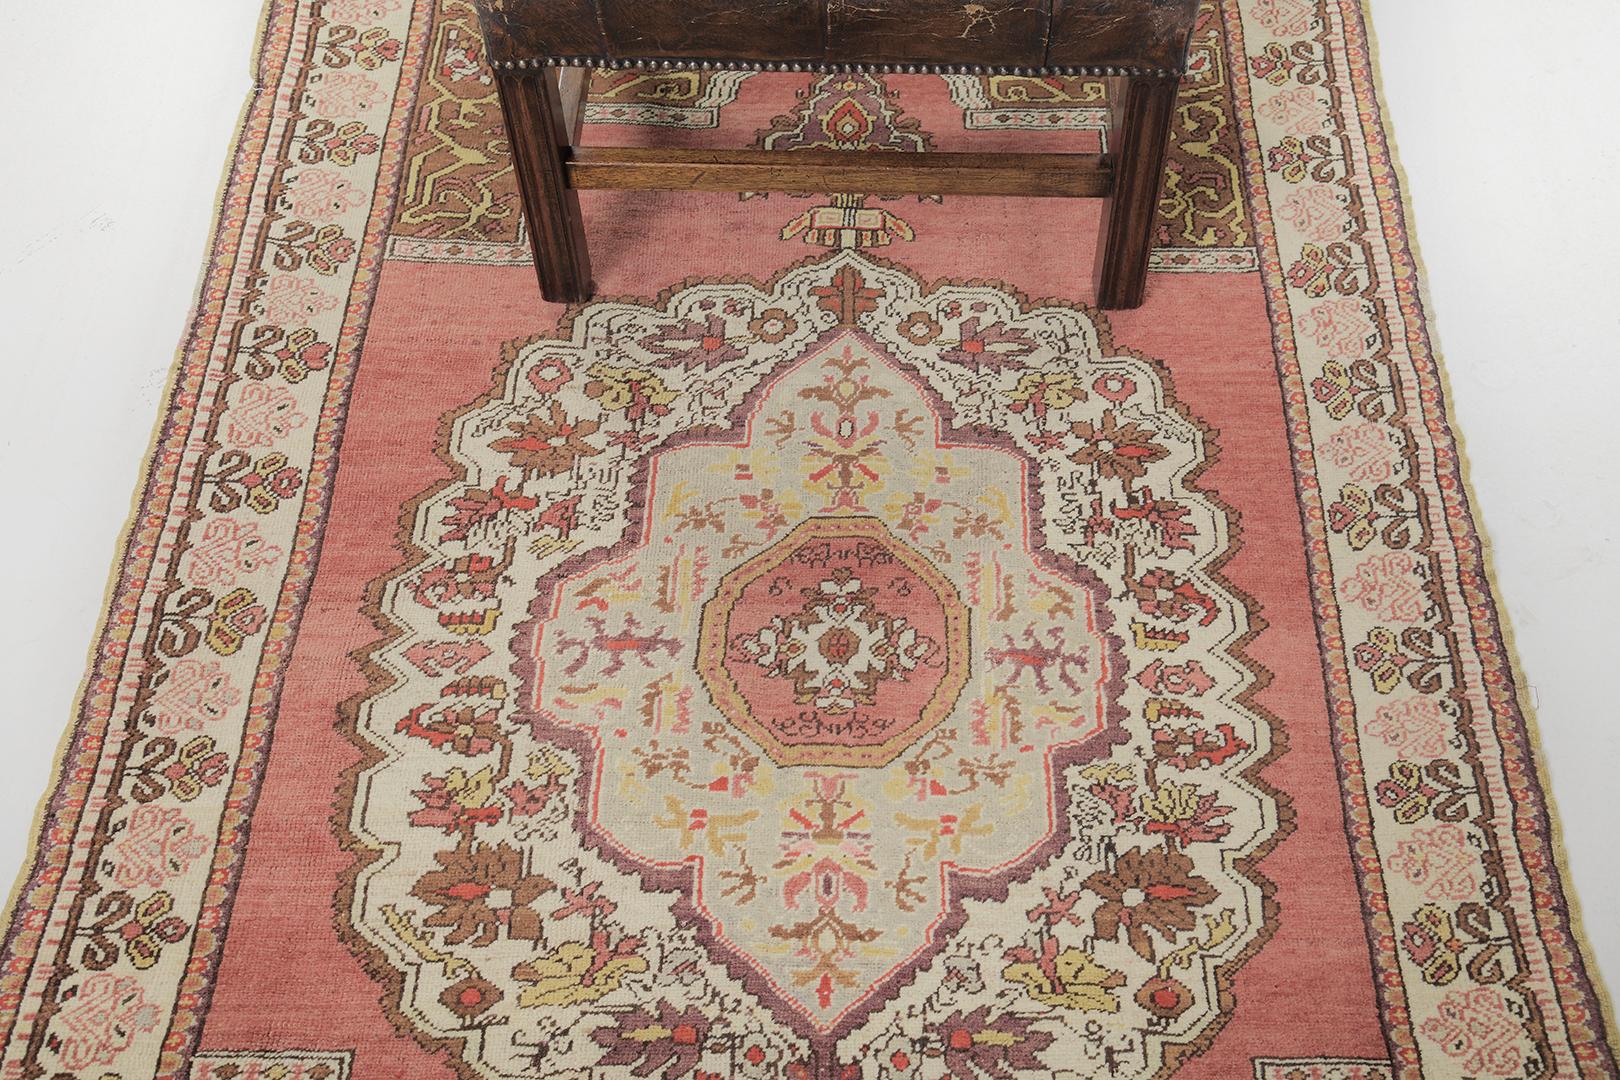 Known as the most authentic in terms of traditional style and motif, this iconic vintage of Avonas rug features tones of camel, tan, and brown color schemes. Meticulously hand-woven details where ornate flowers are accentuated with a grandiose red